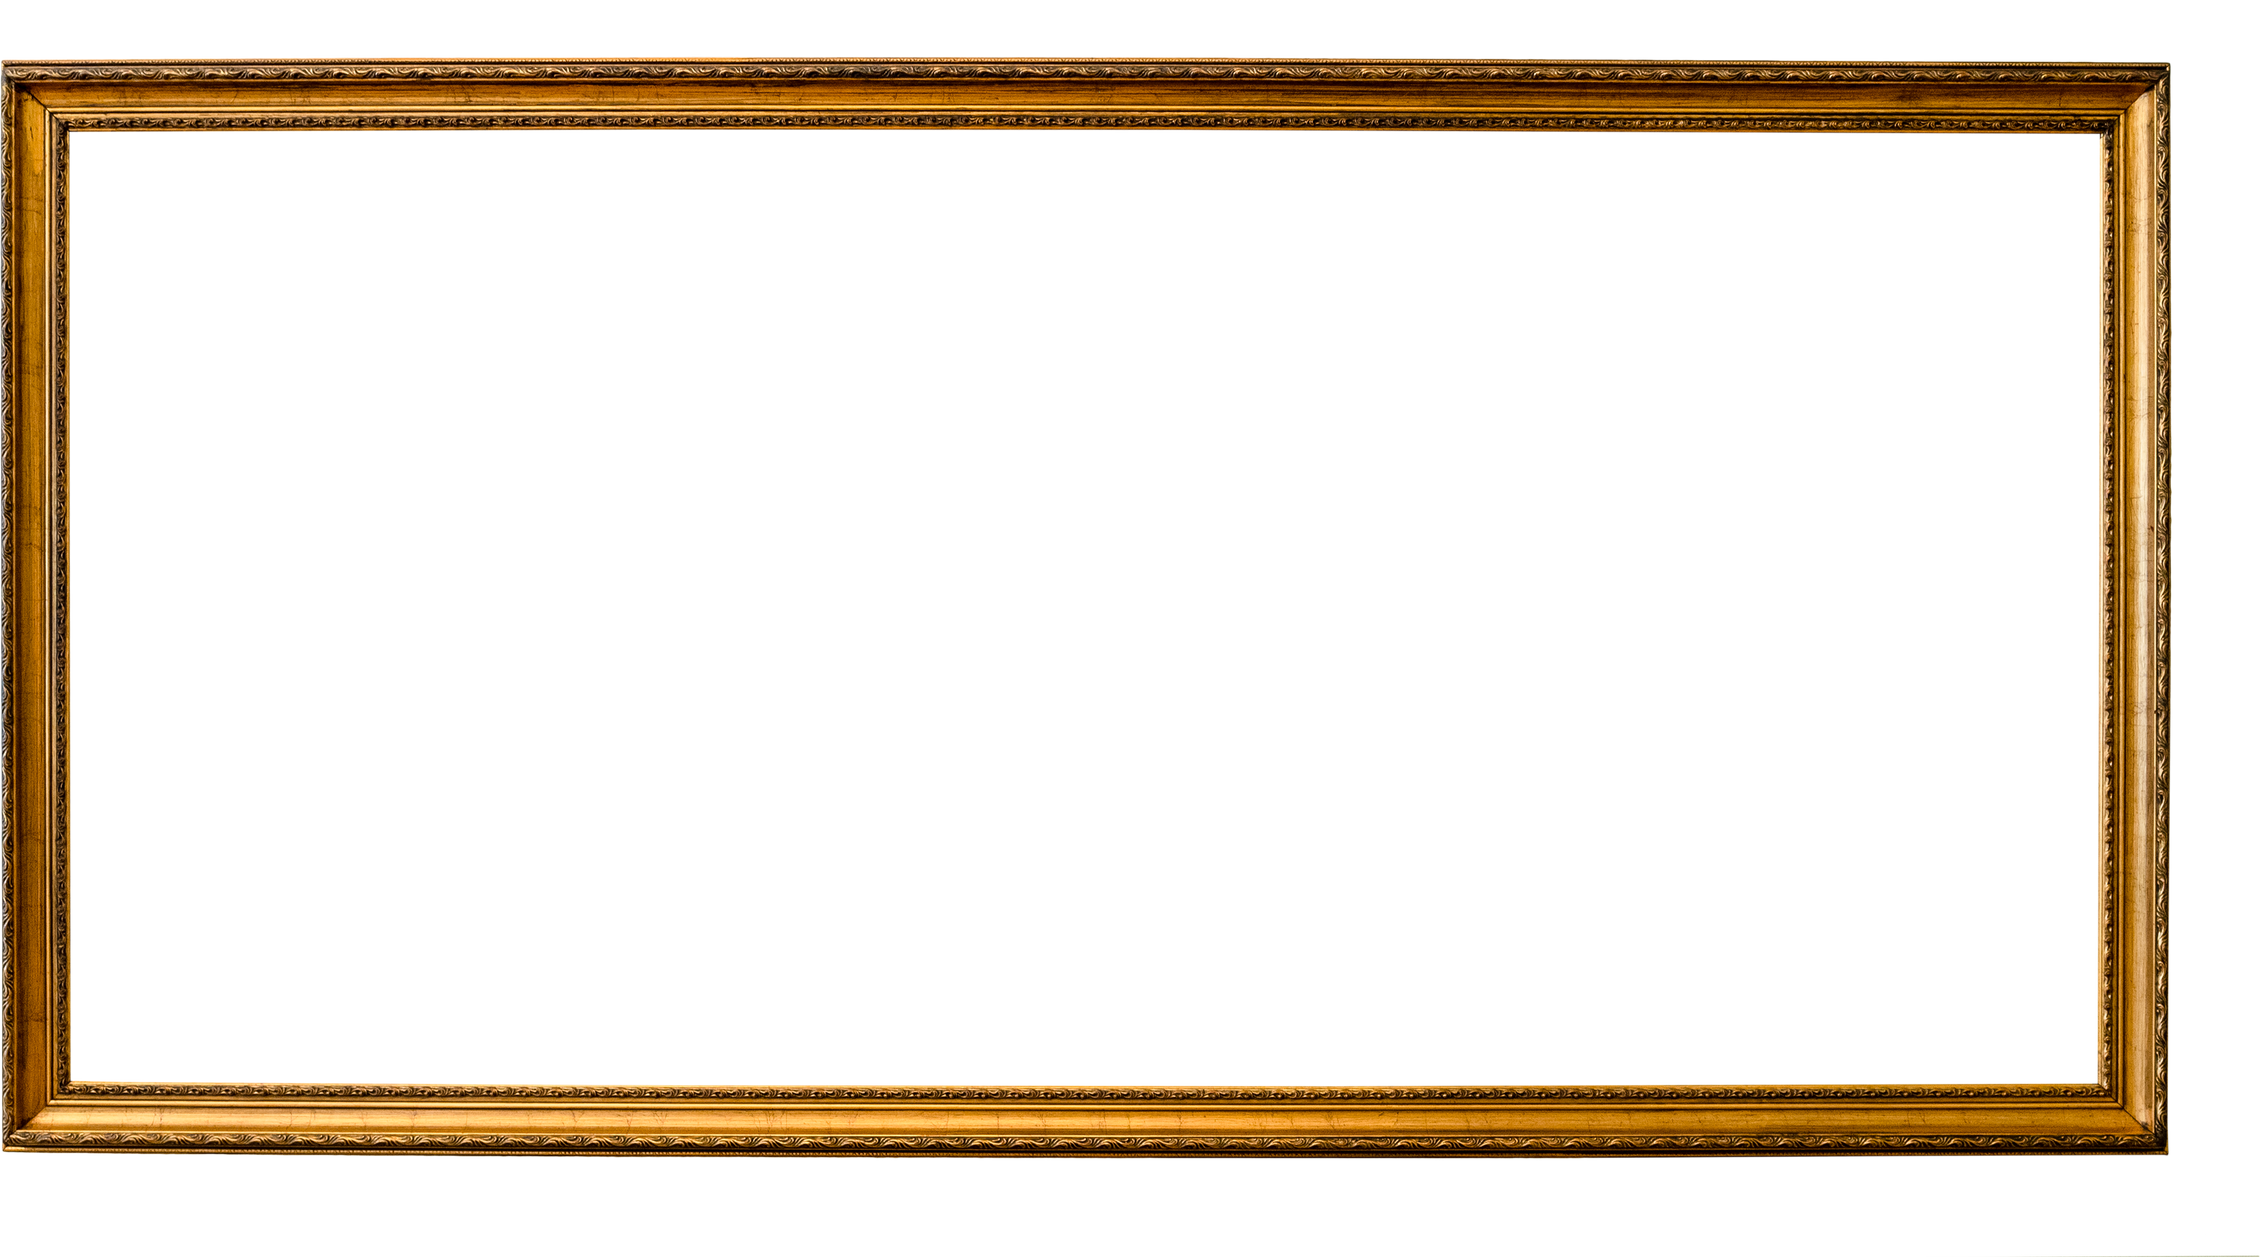 blank long narrow old golden picture frame cutout